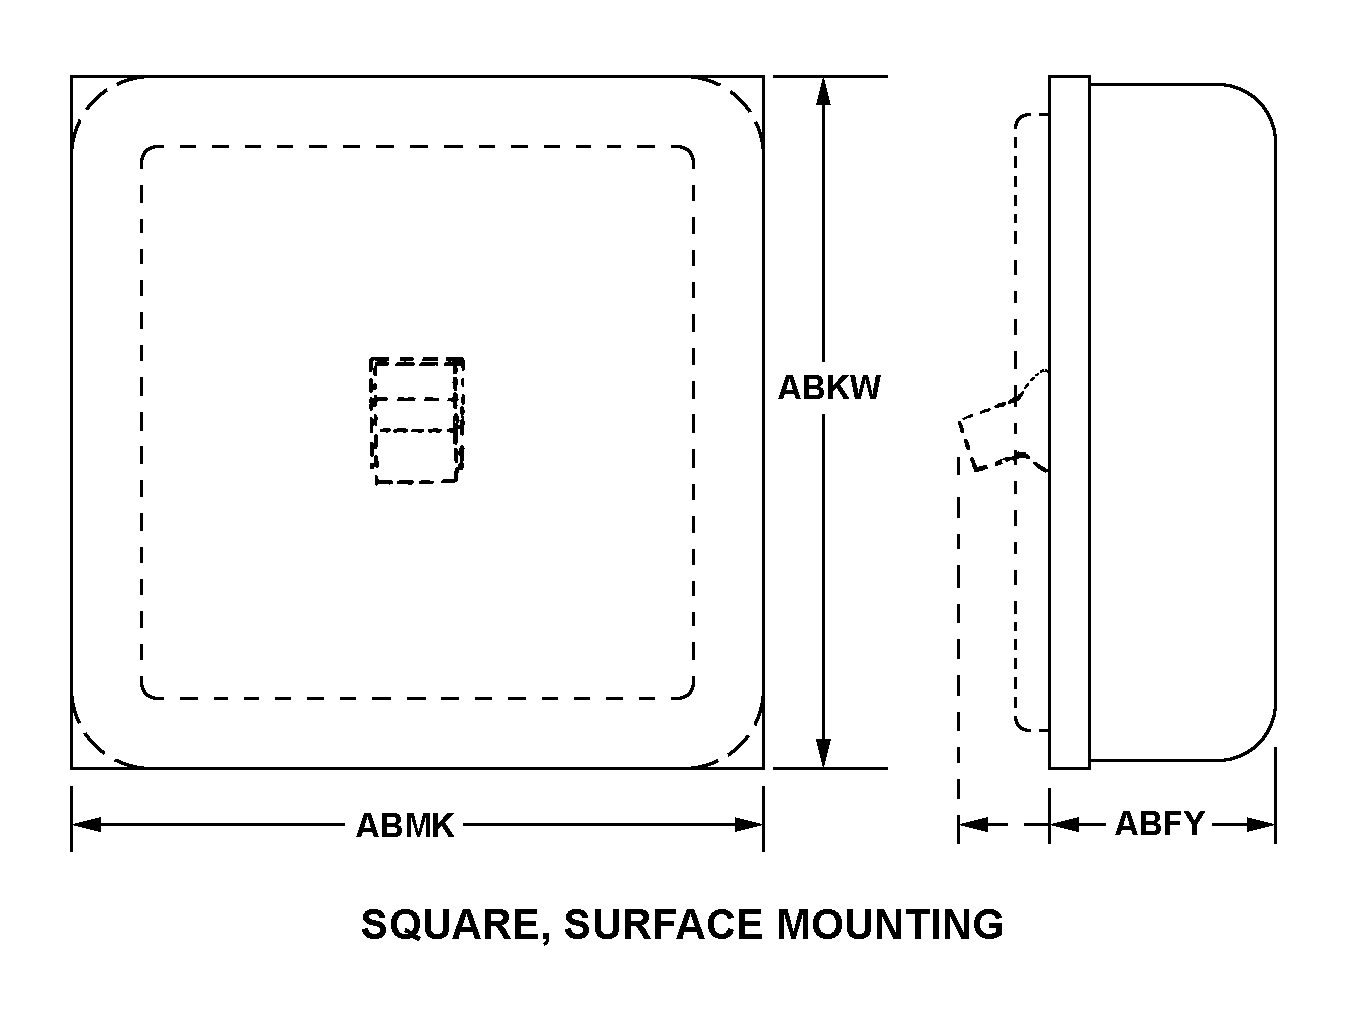 SQUARE, SURFACE MOUNTING style nsn 6110-00-889-1263